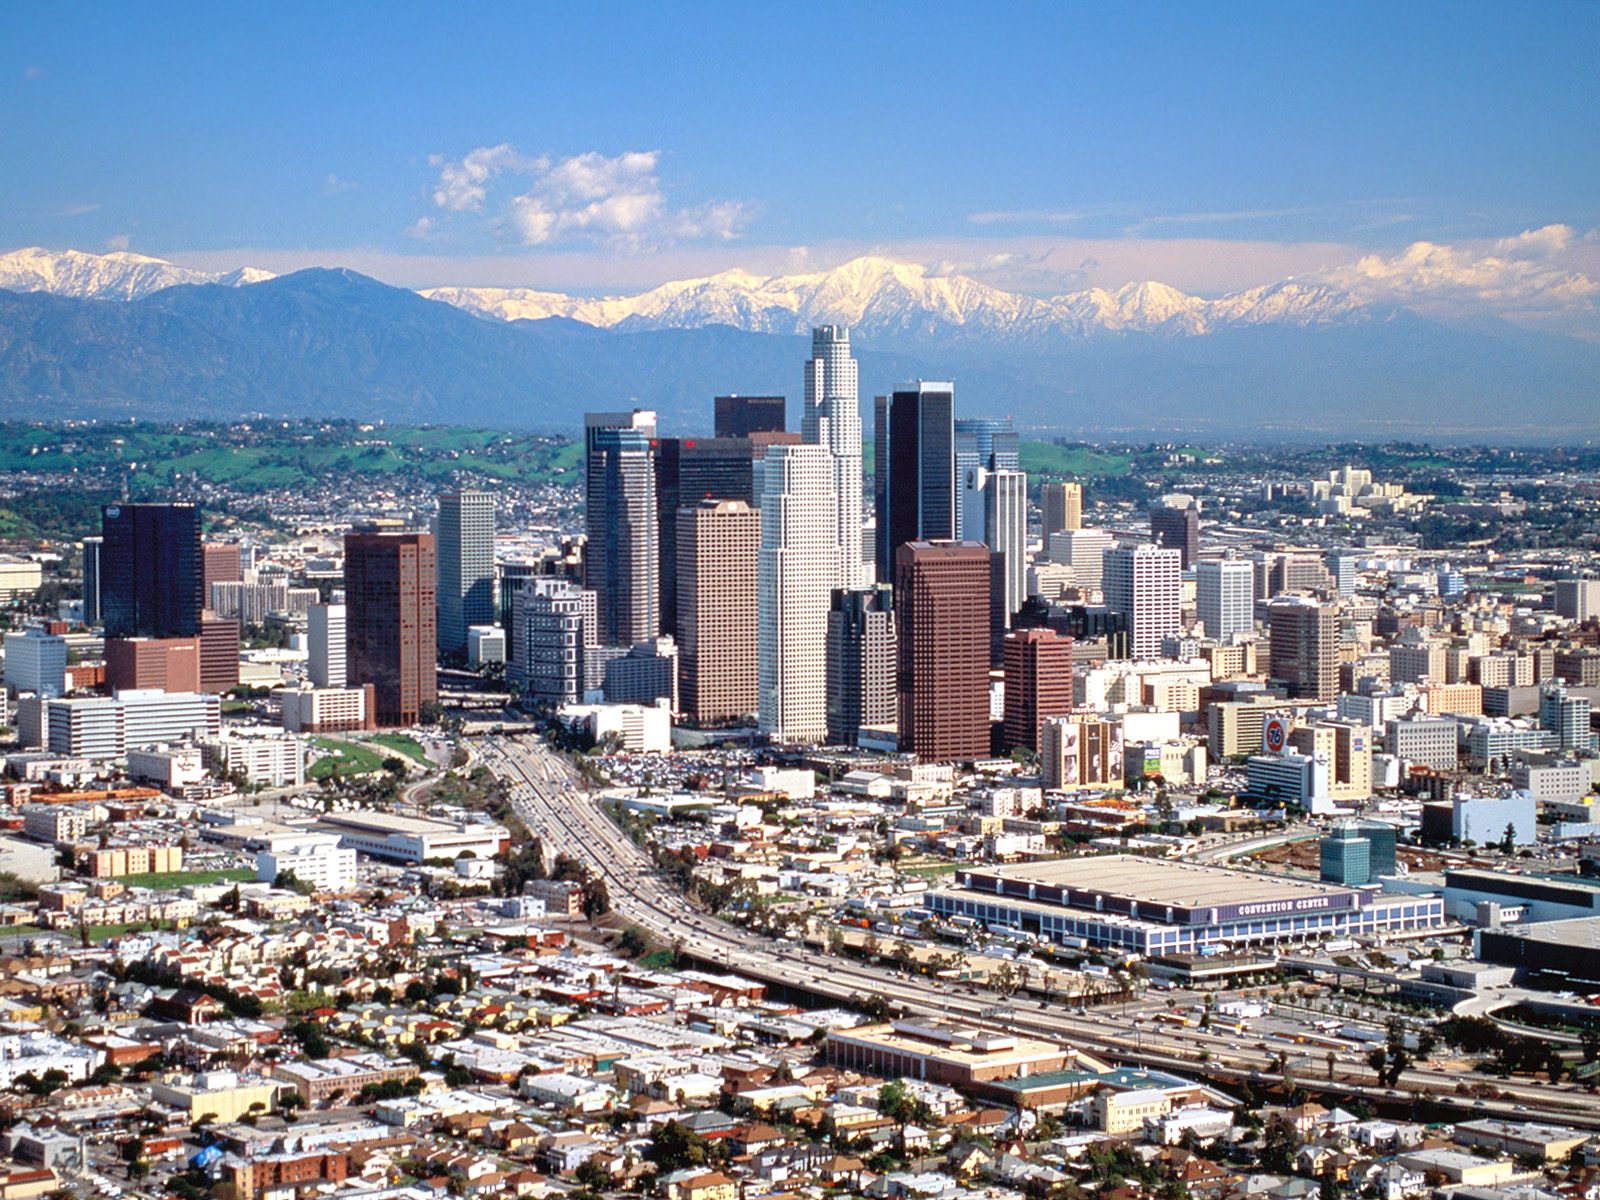  Los Angeles California Wallpapers Pictures Photos and Backgrounds